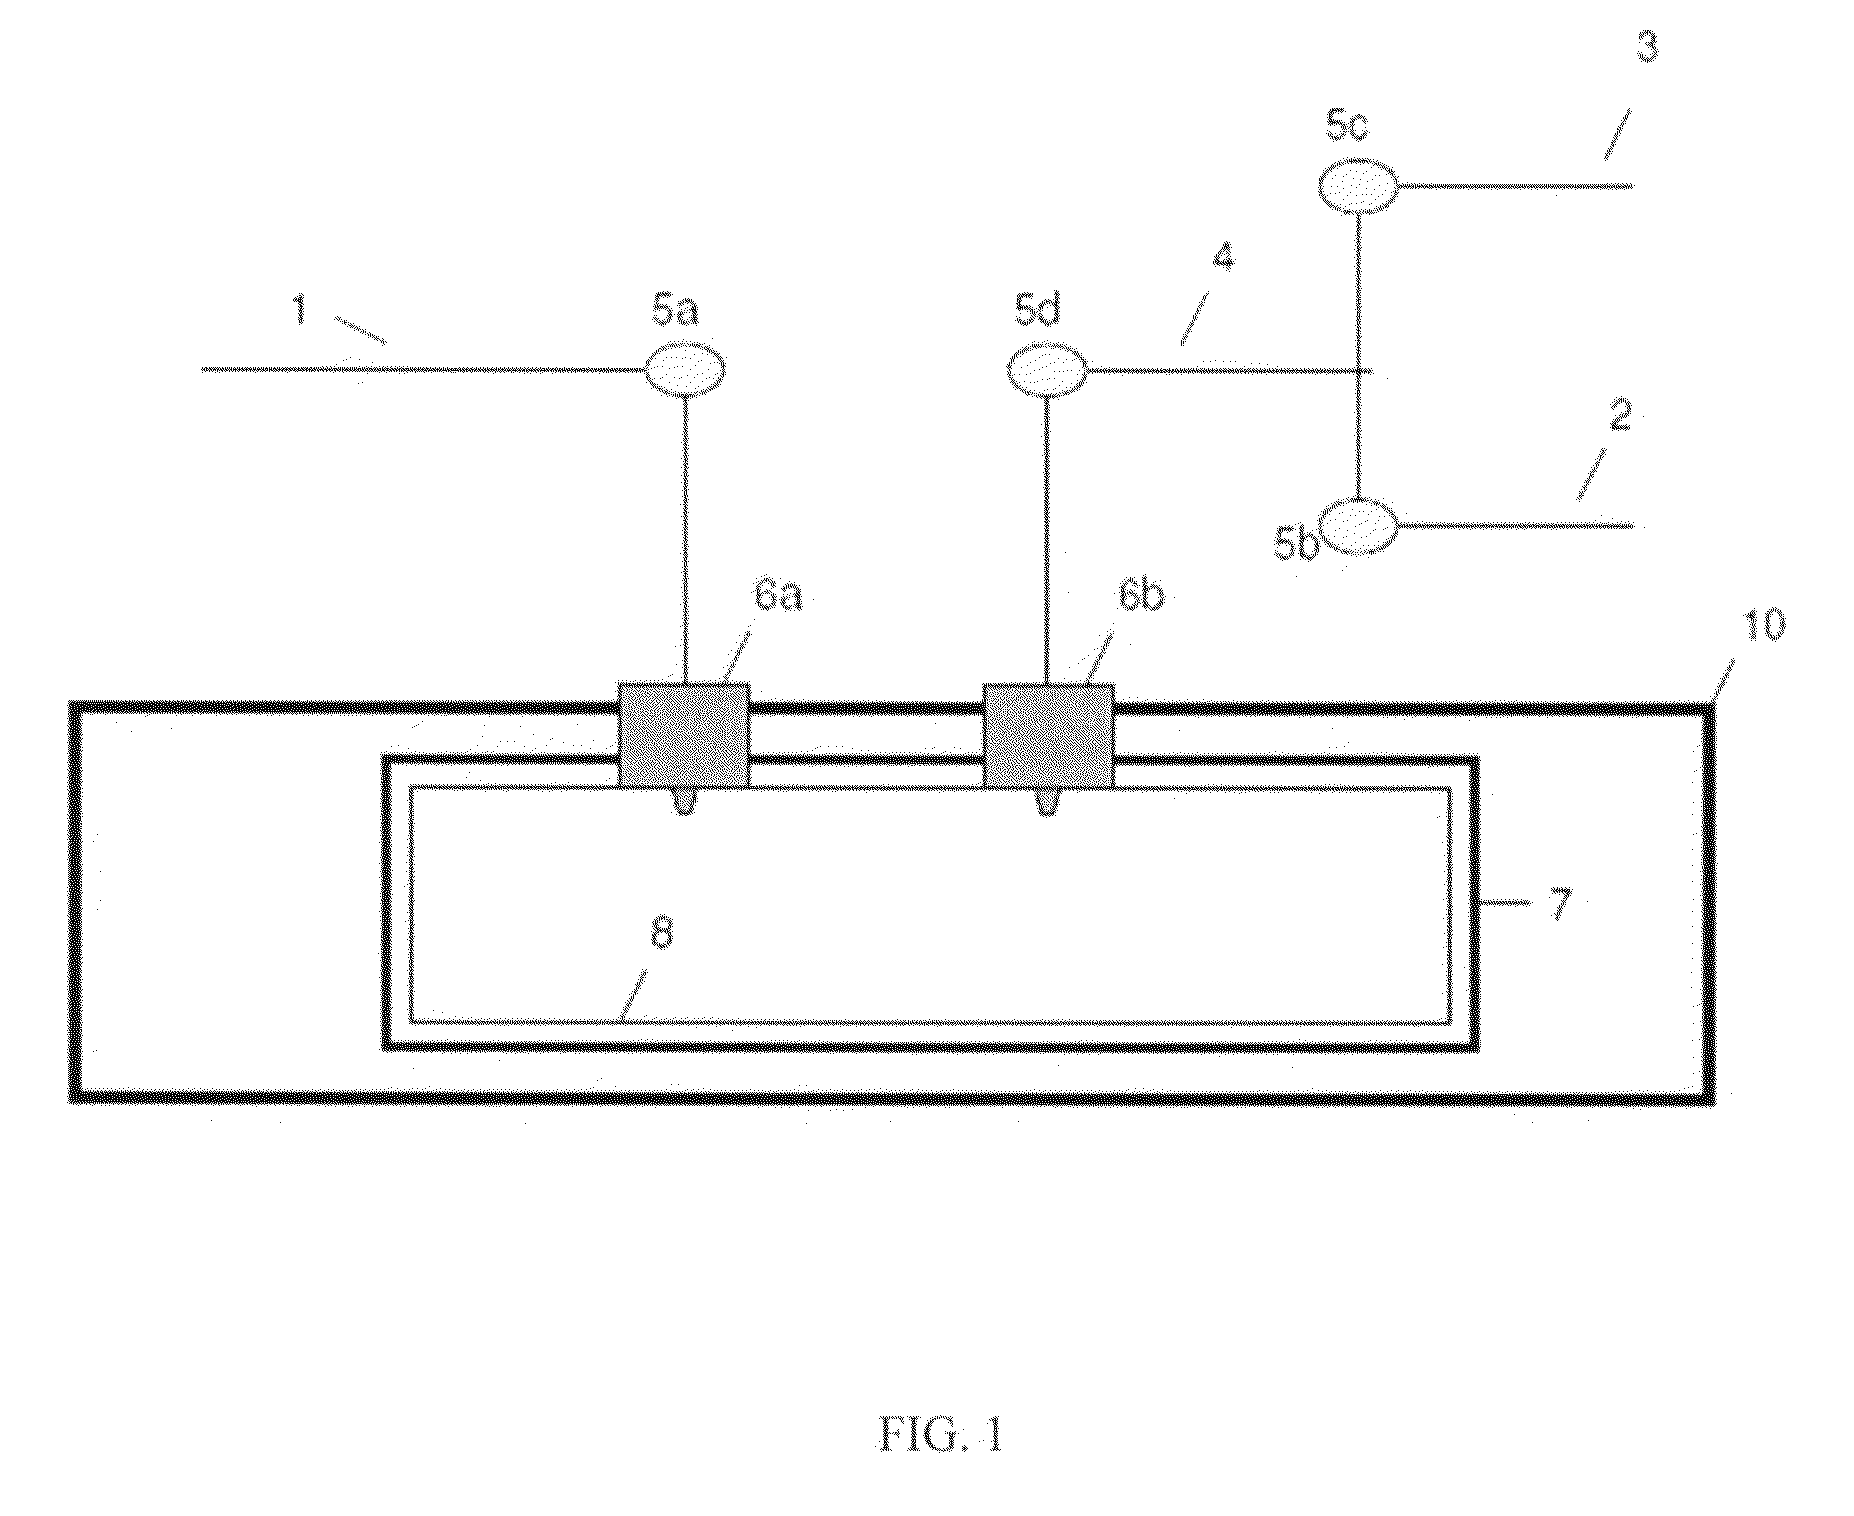 Methods for co-flash evaporation of polymerizable monomers and non-polymerizable carrier solvent/salt mixtures/solutions